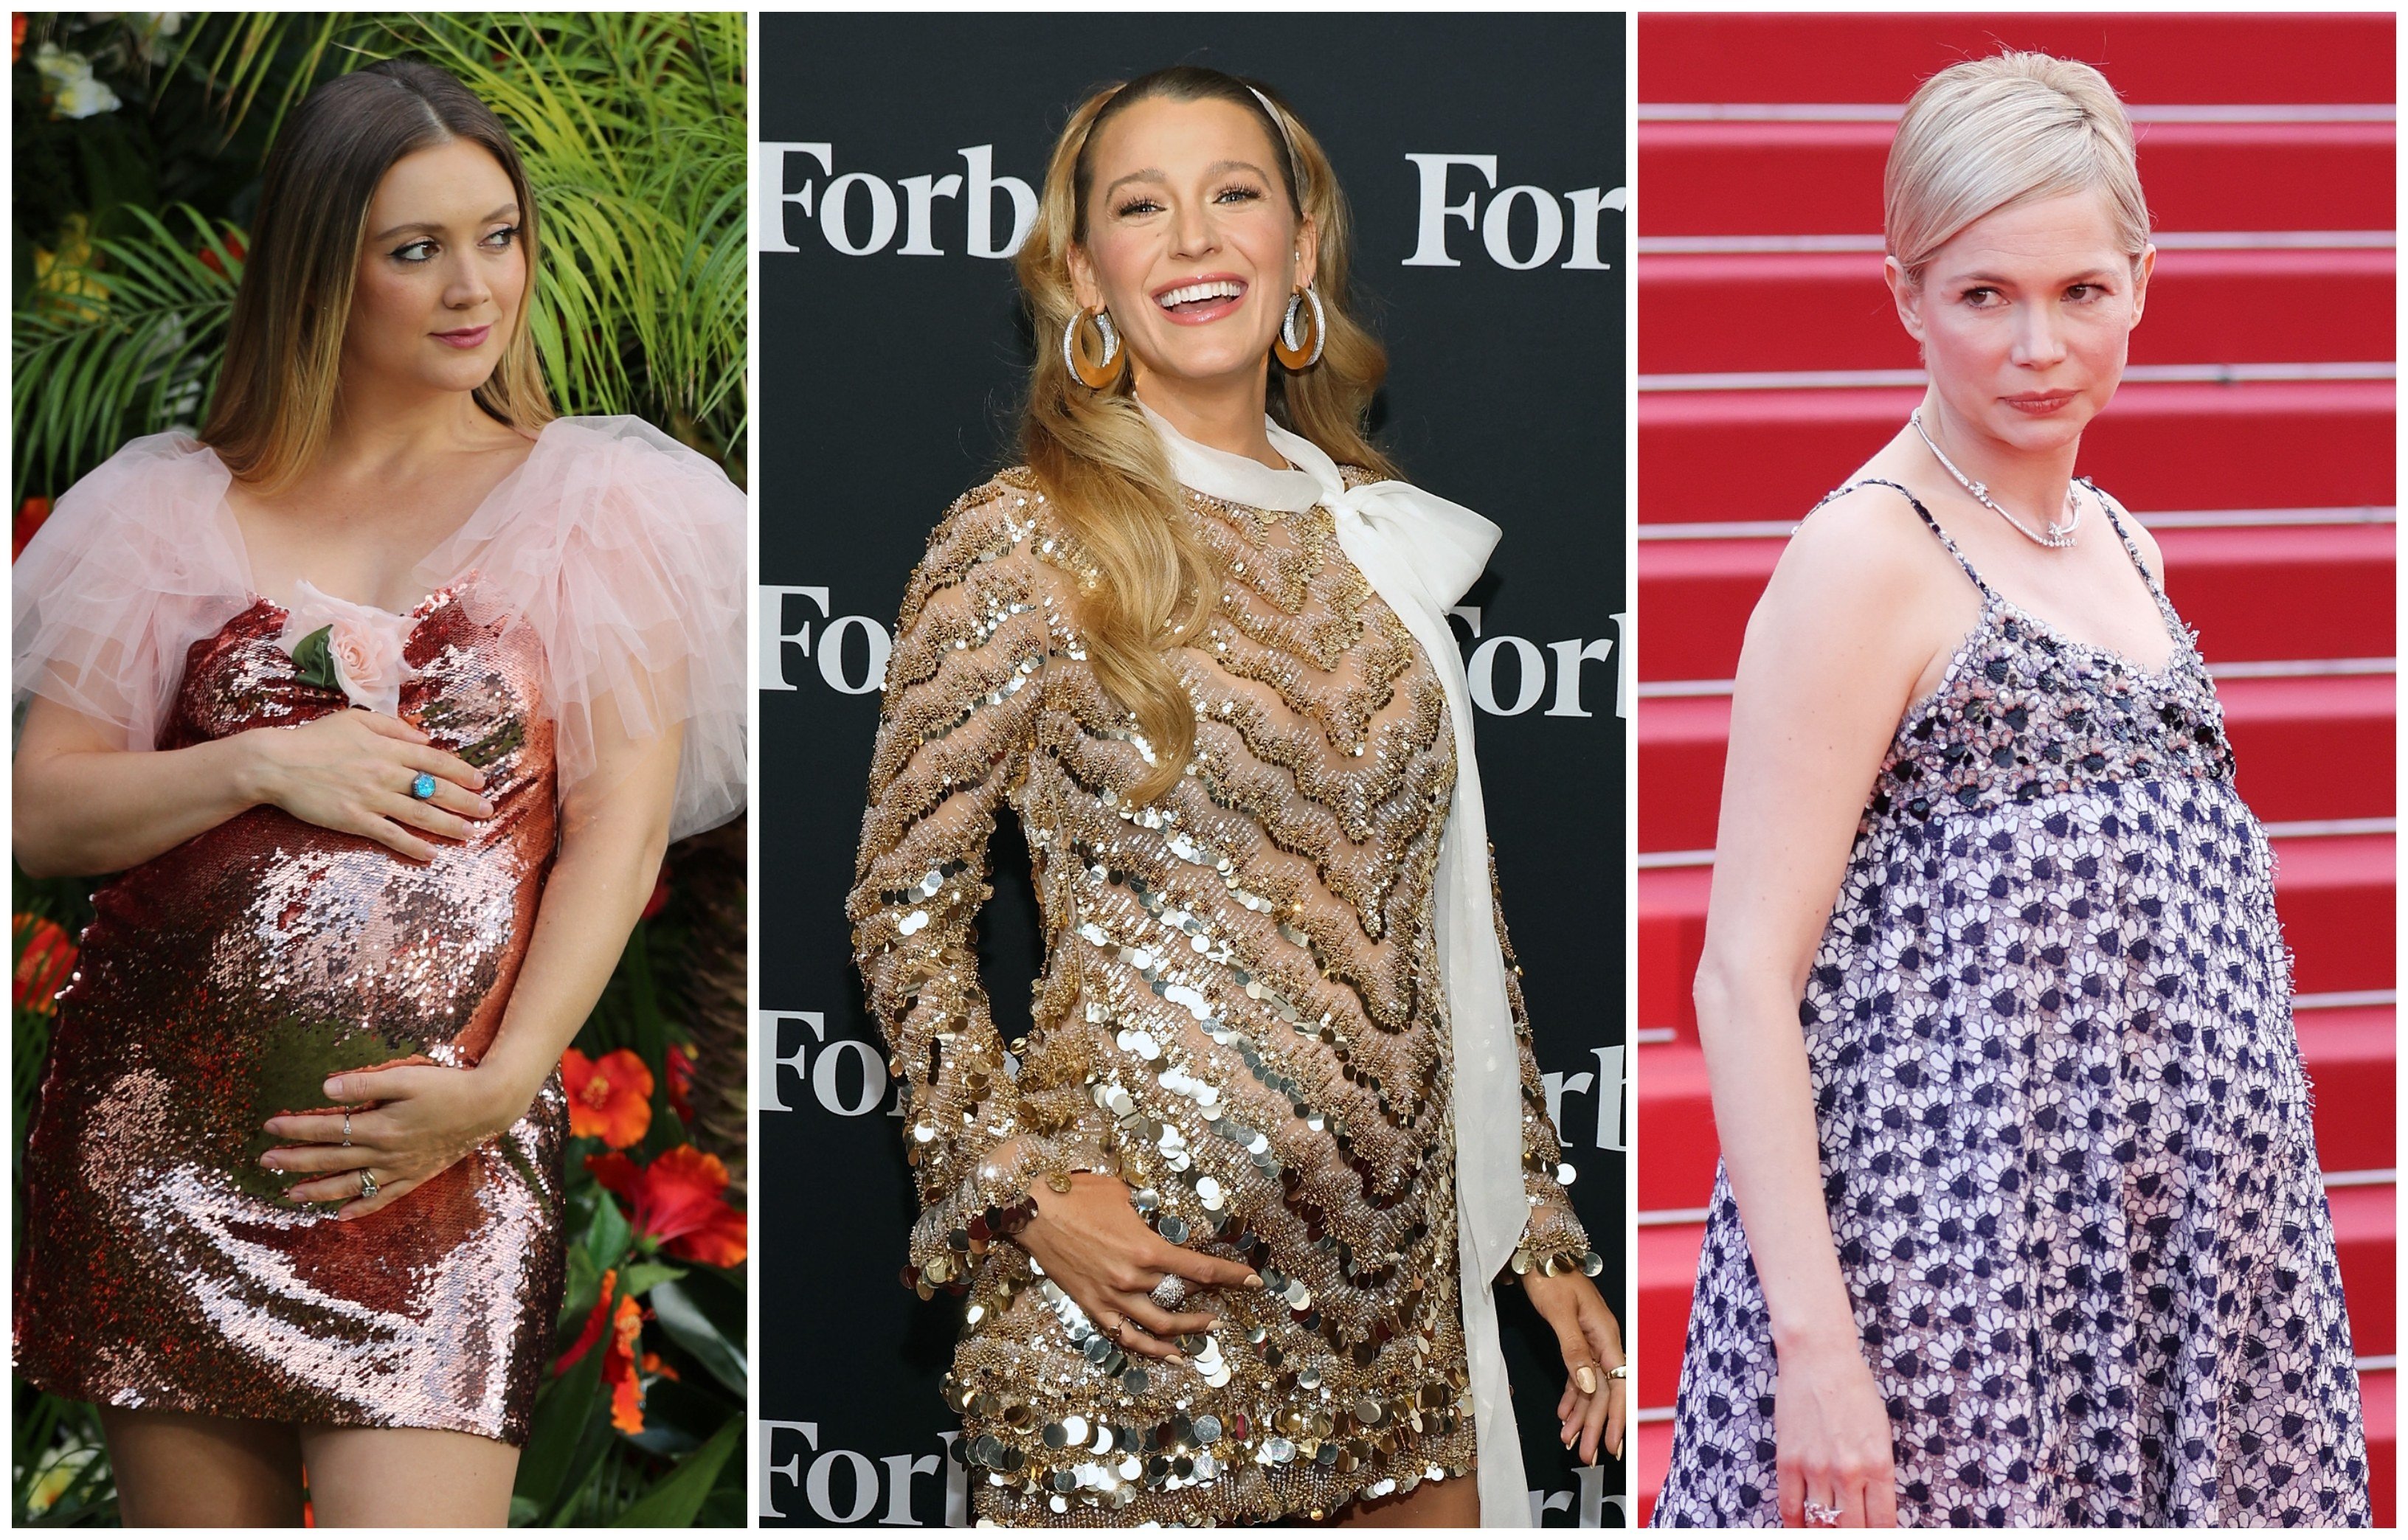 Michelle Williams, Billie Lourd and Blake Lively showed off their baby bumps on red carpets. Photos: Reuters, EPA-EFE, AFP, Invision/AP